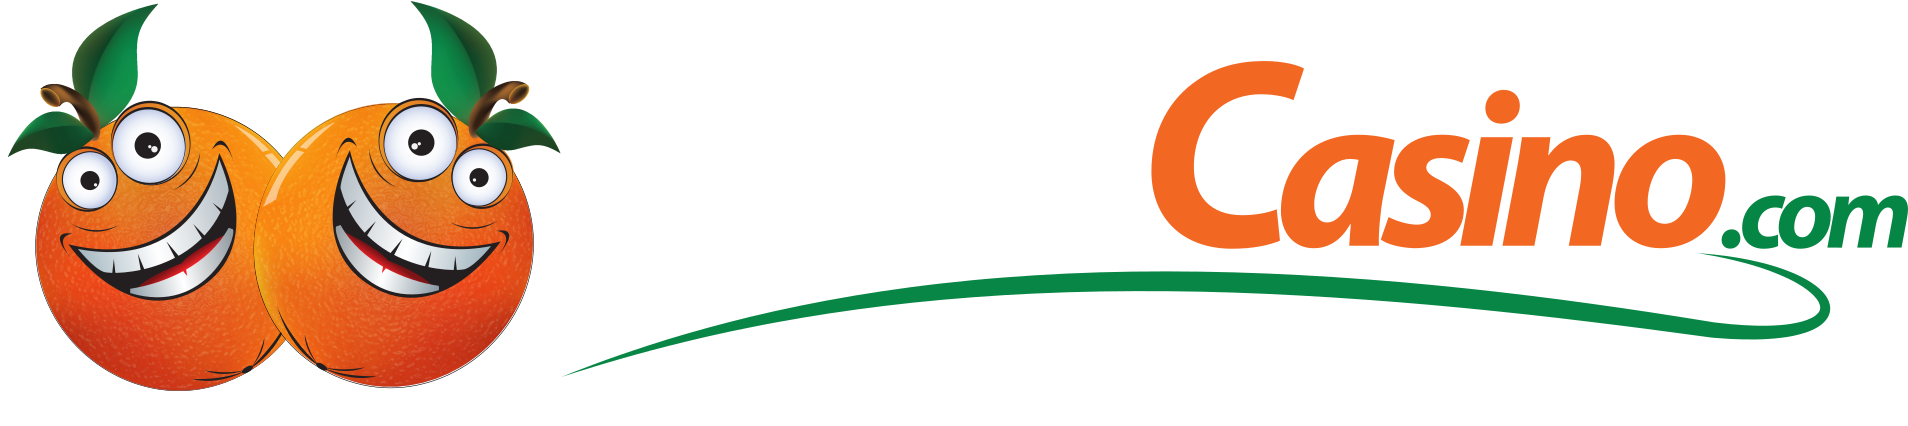 Casino as One of the Best Casino Sites with free signup bonus